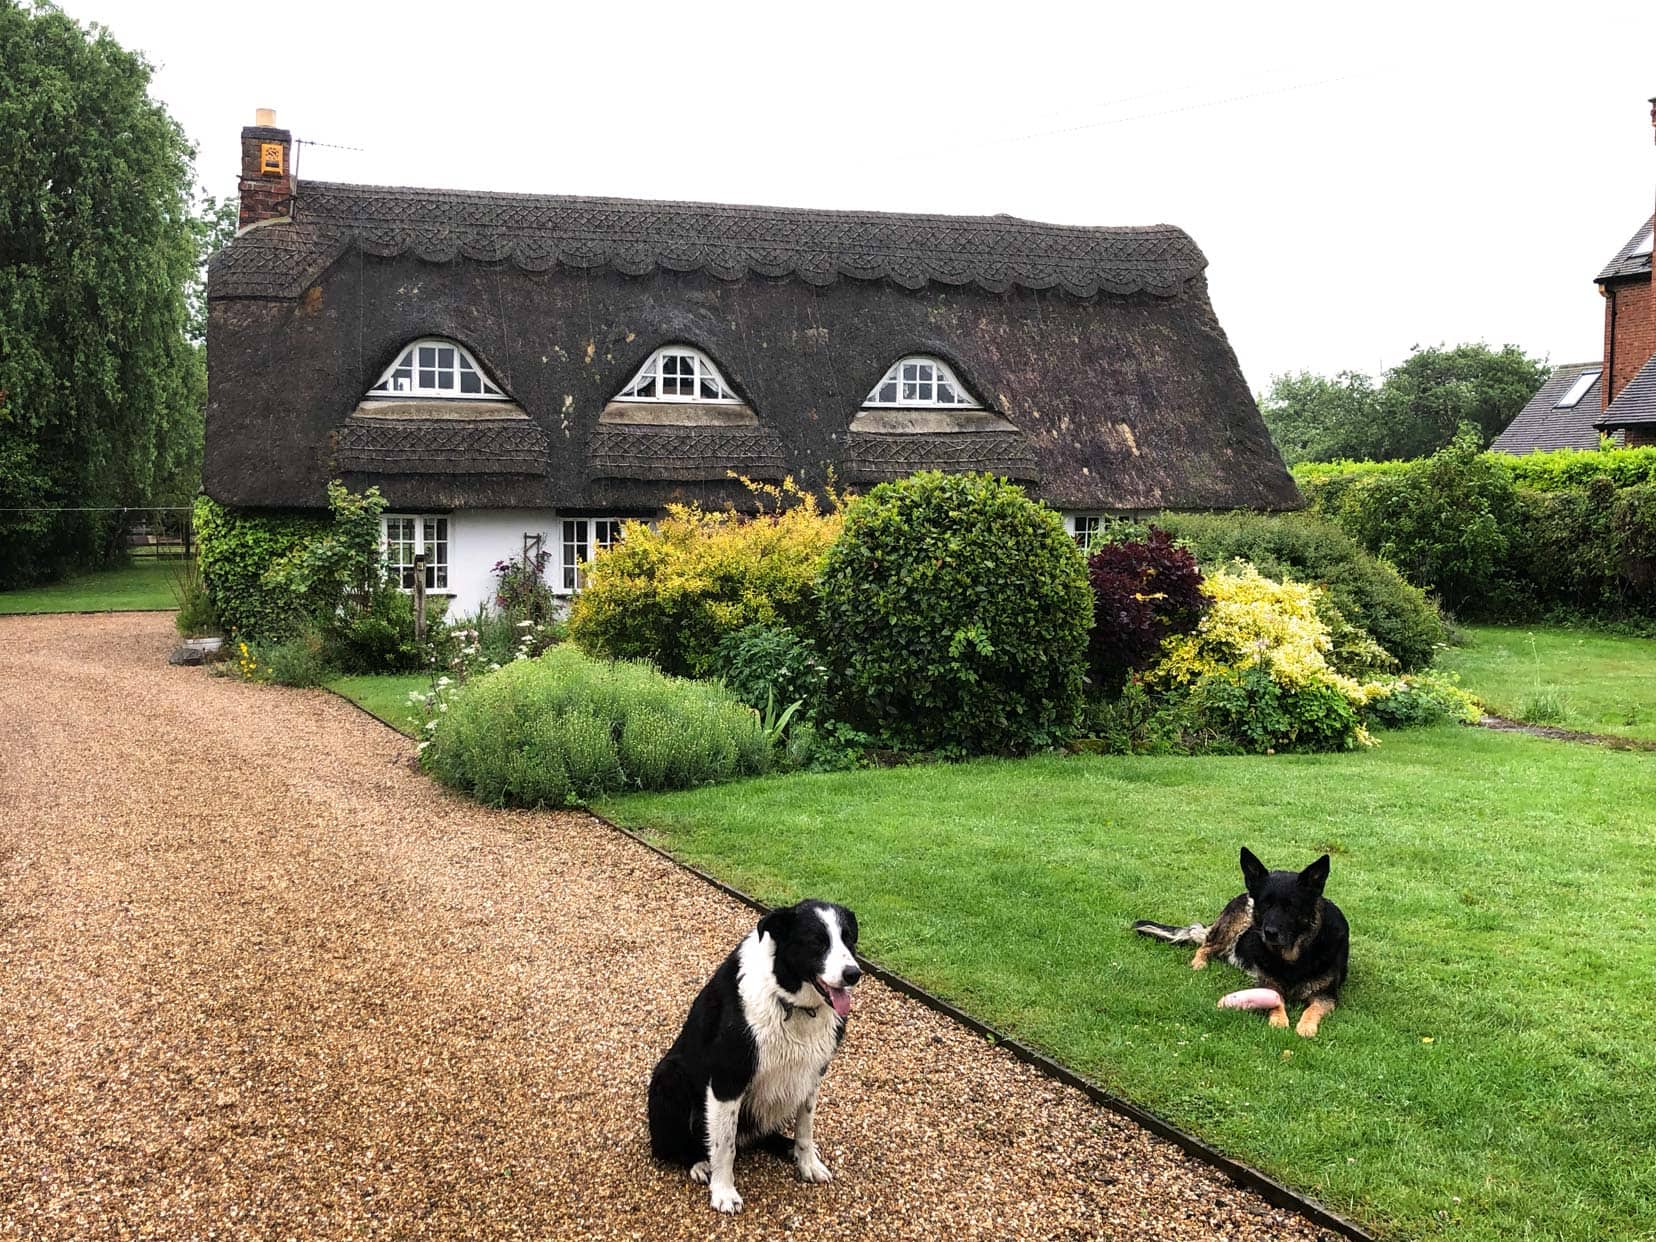 House sitting in the Cotswolds, UK - Thatched roof house and two dogs sat on a lawn